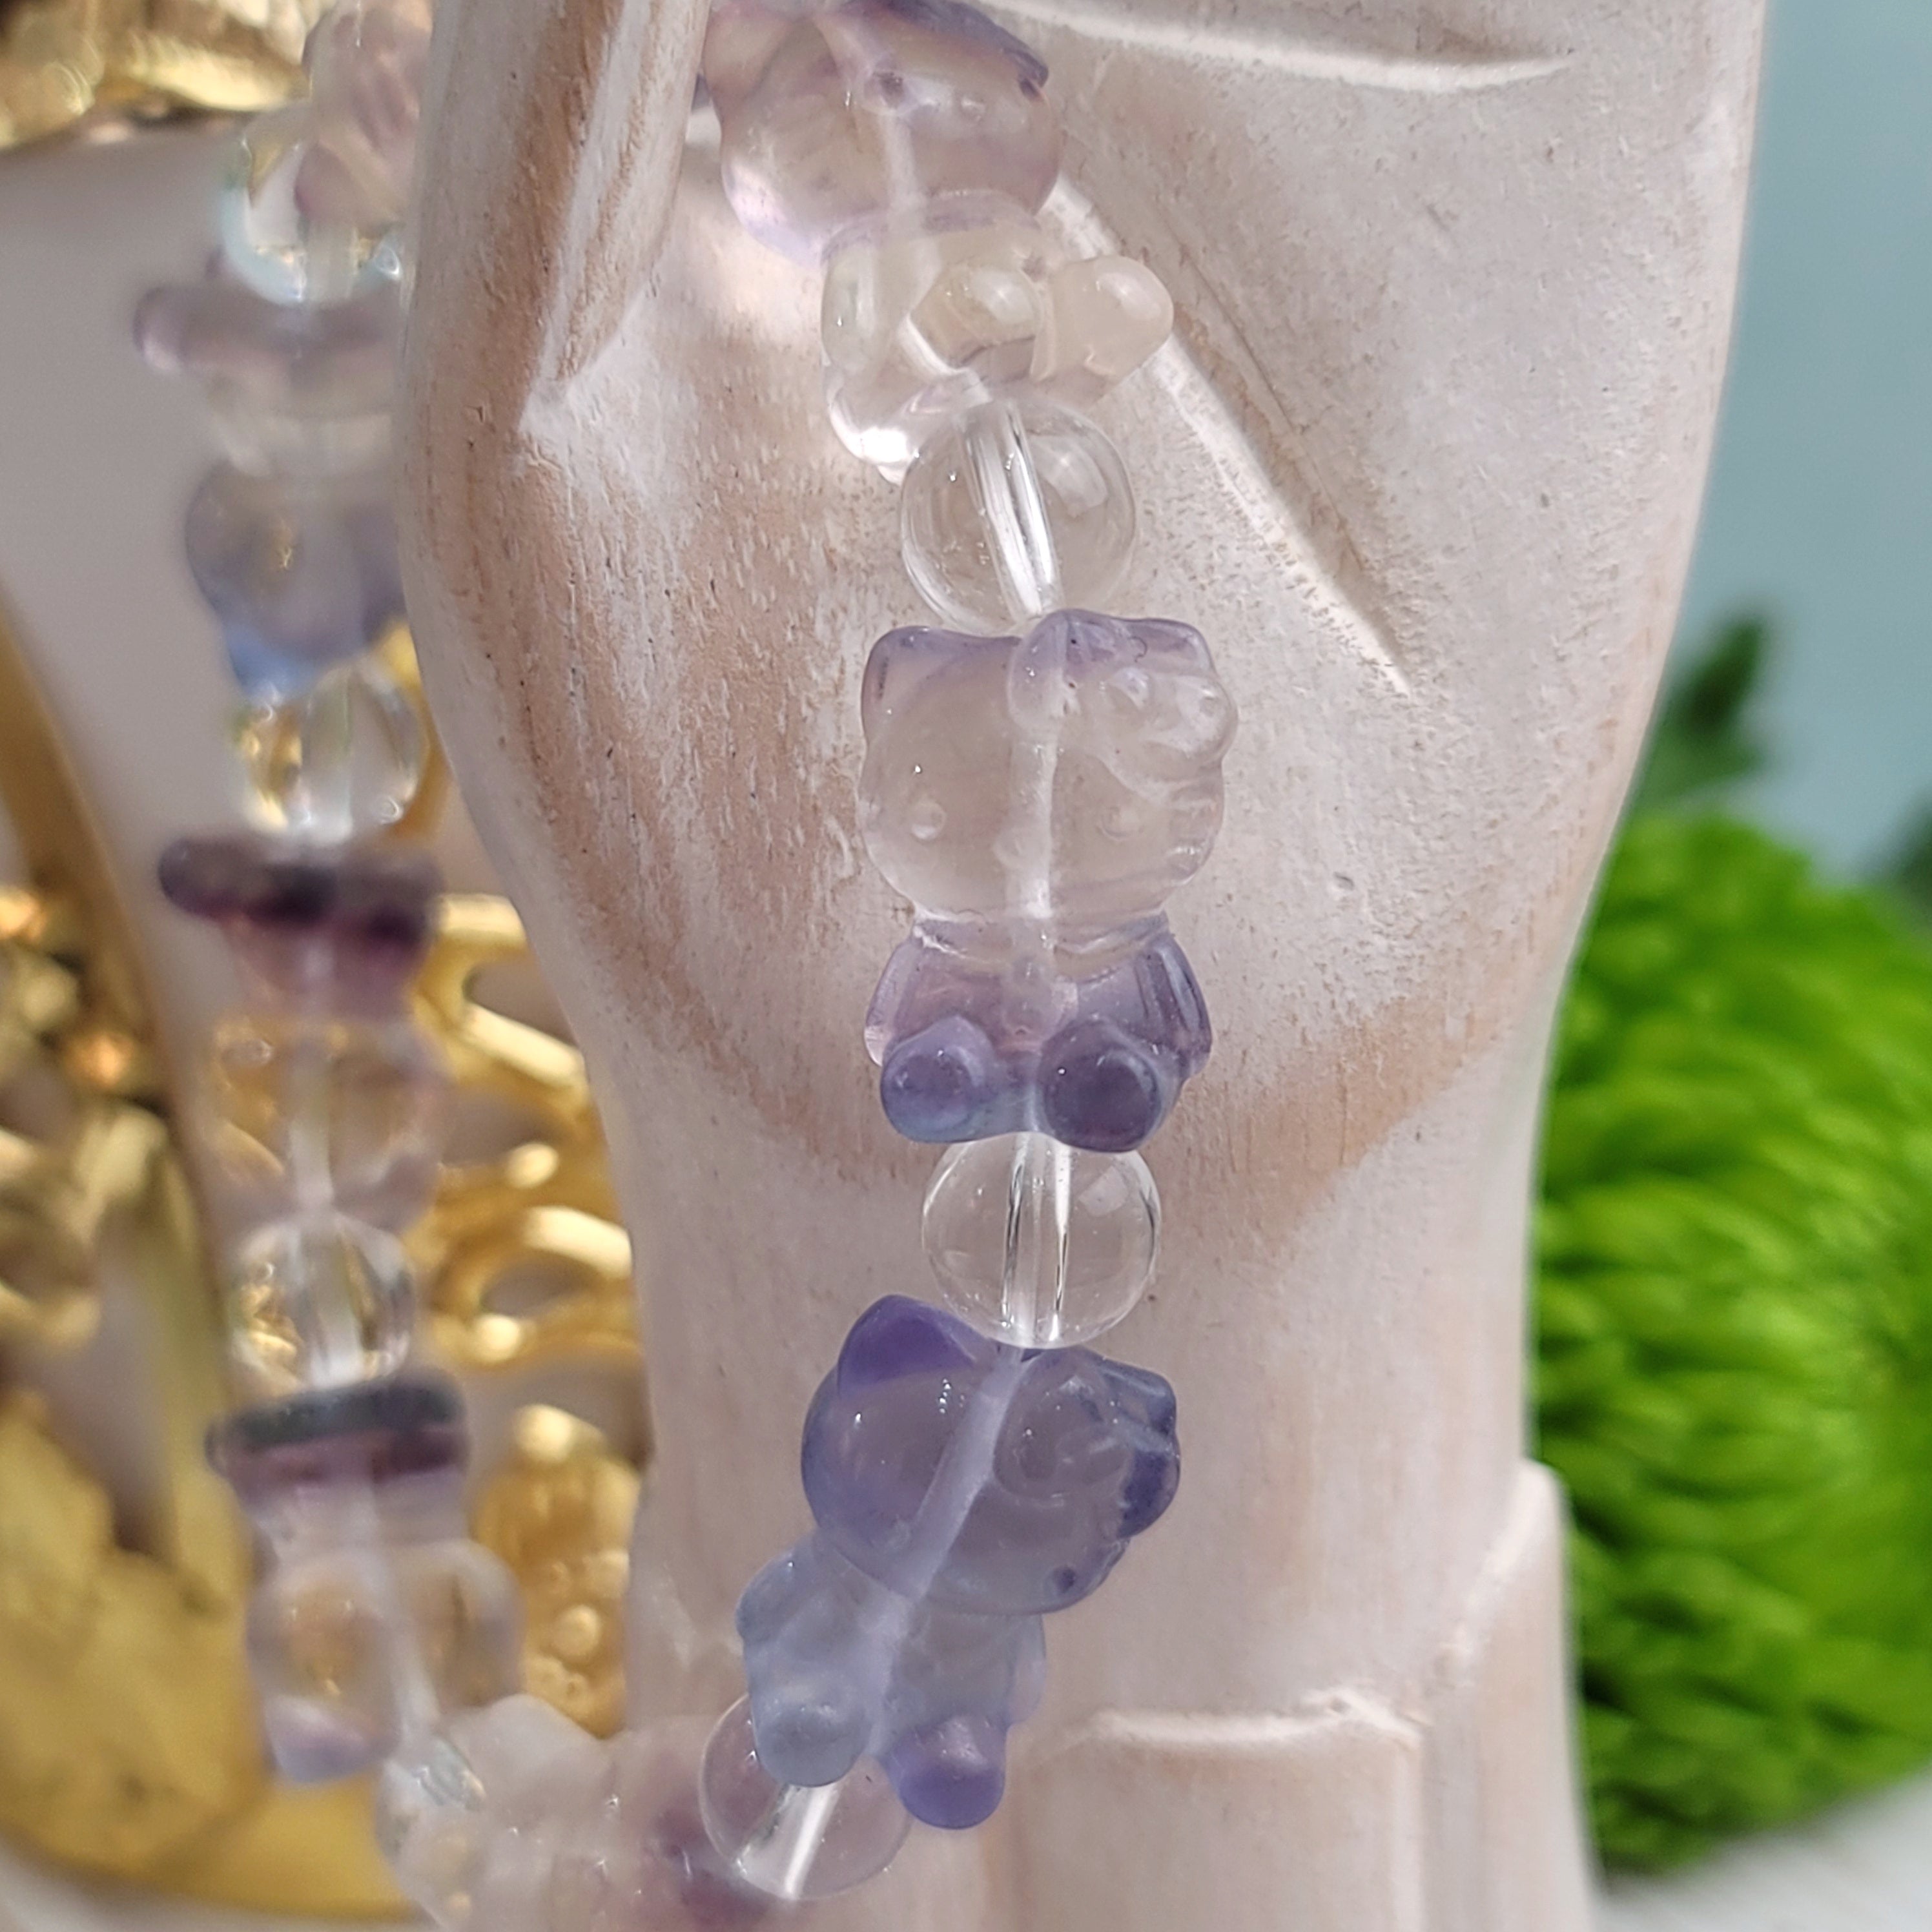 Fluorite Hello Kitty Bracelet for Focus and Mental Clarity